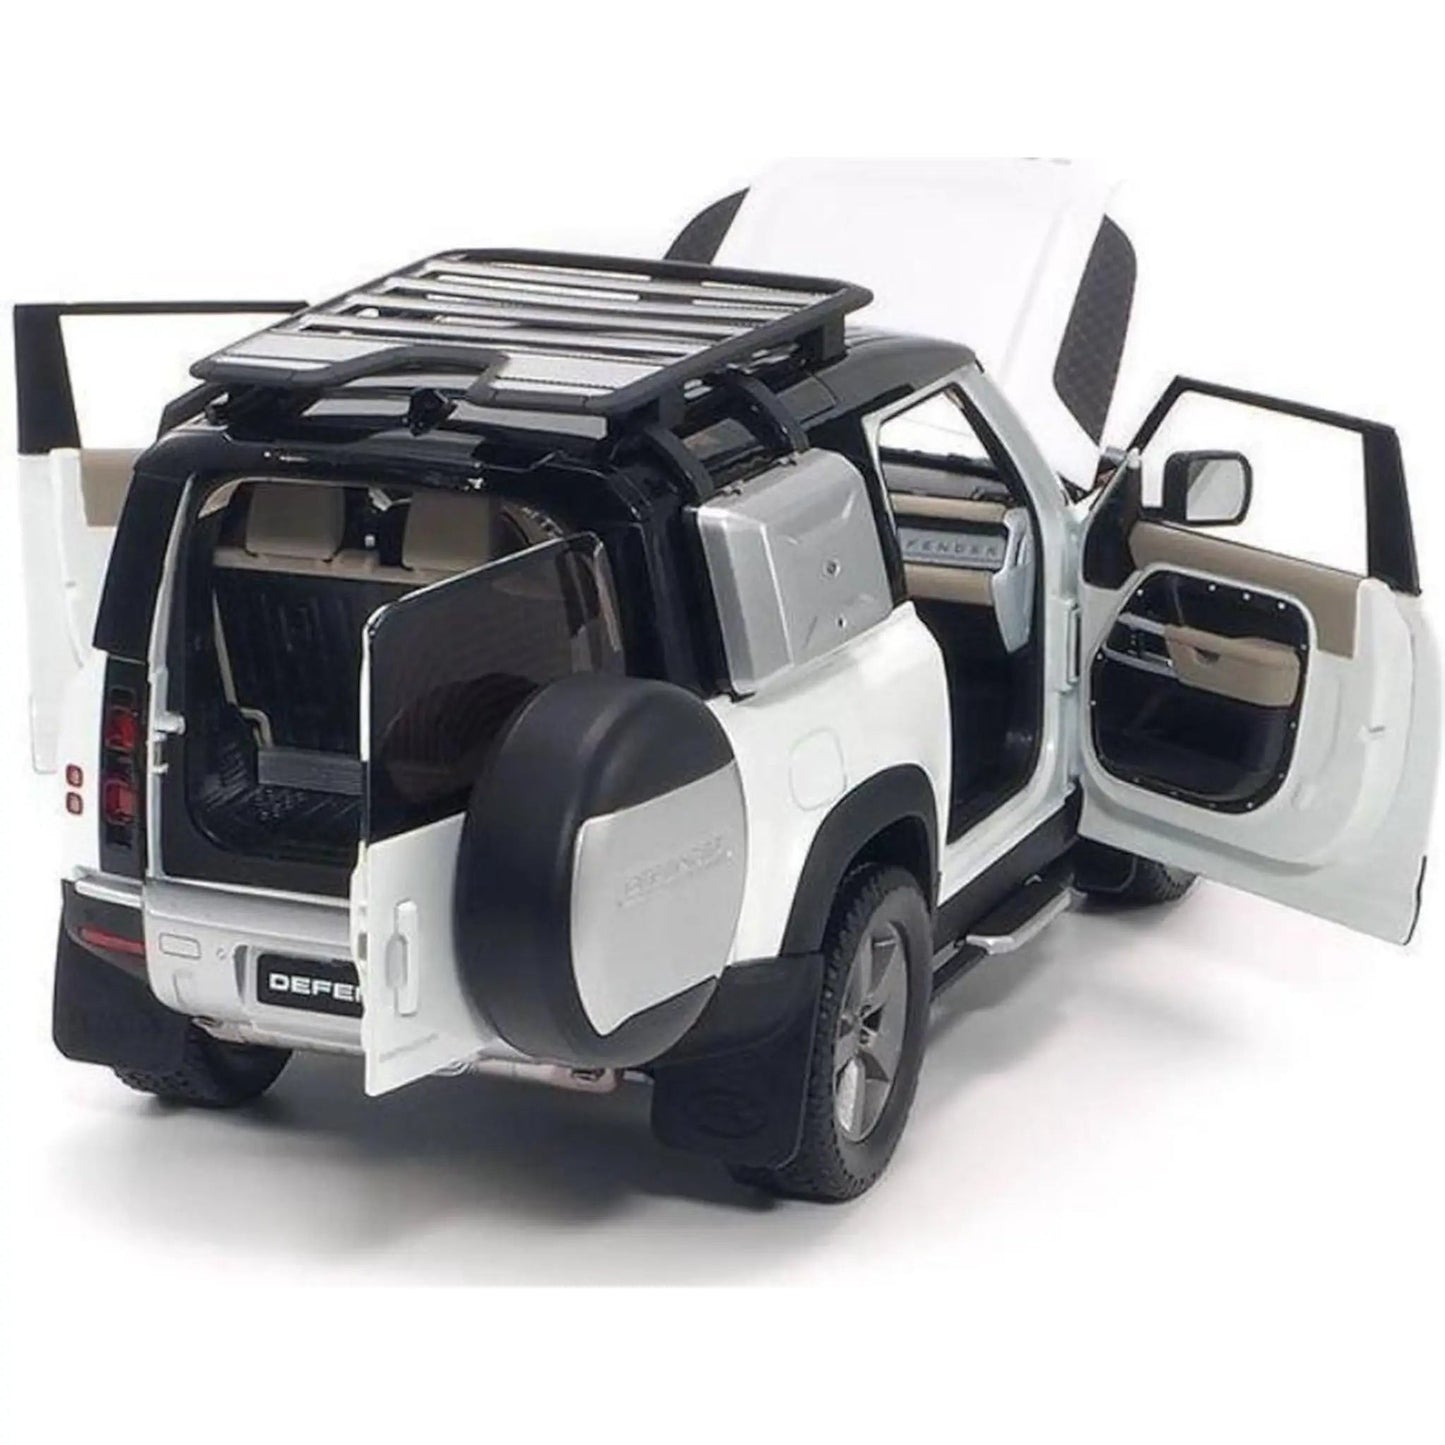 Land Rover Defender 90 2020 With Roof Pack Fuji White Almost Real 1/18 - ALM810707